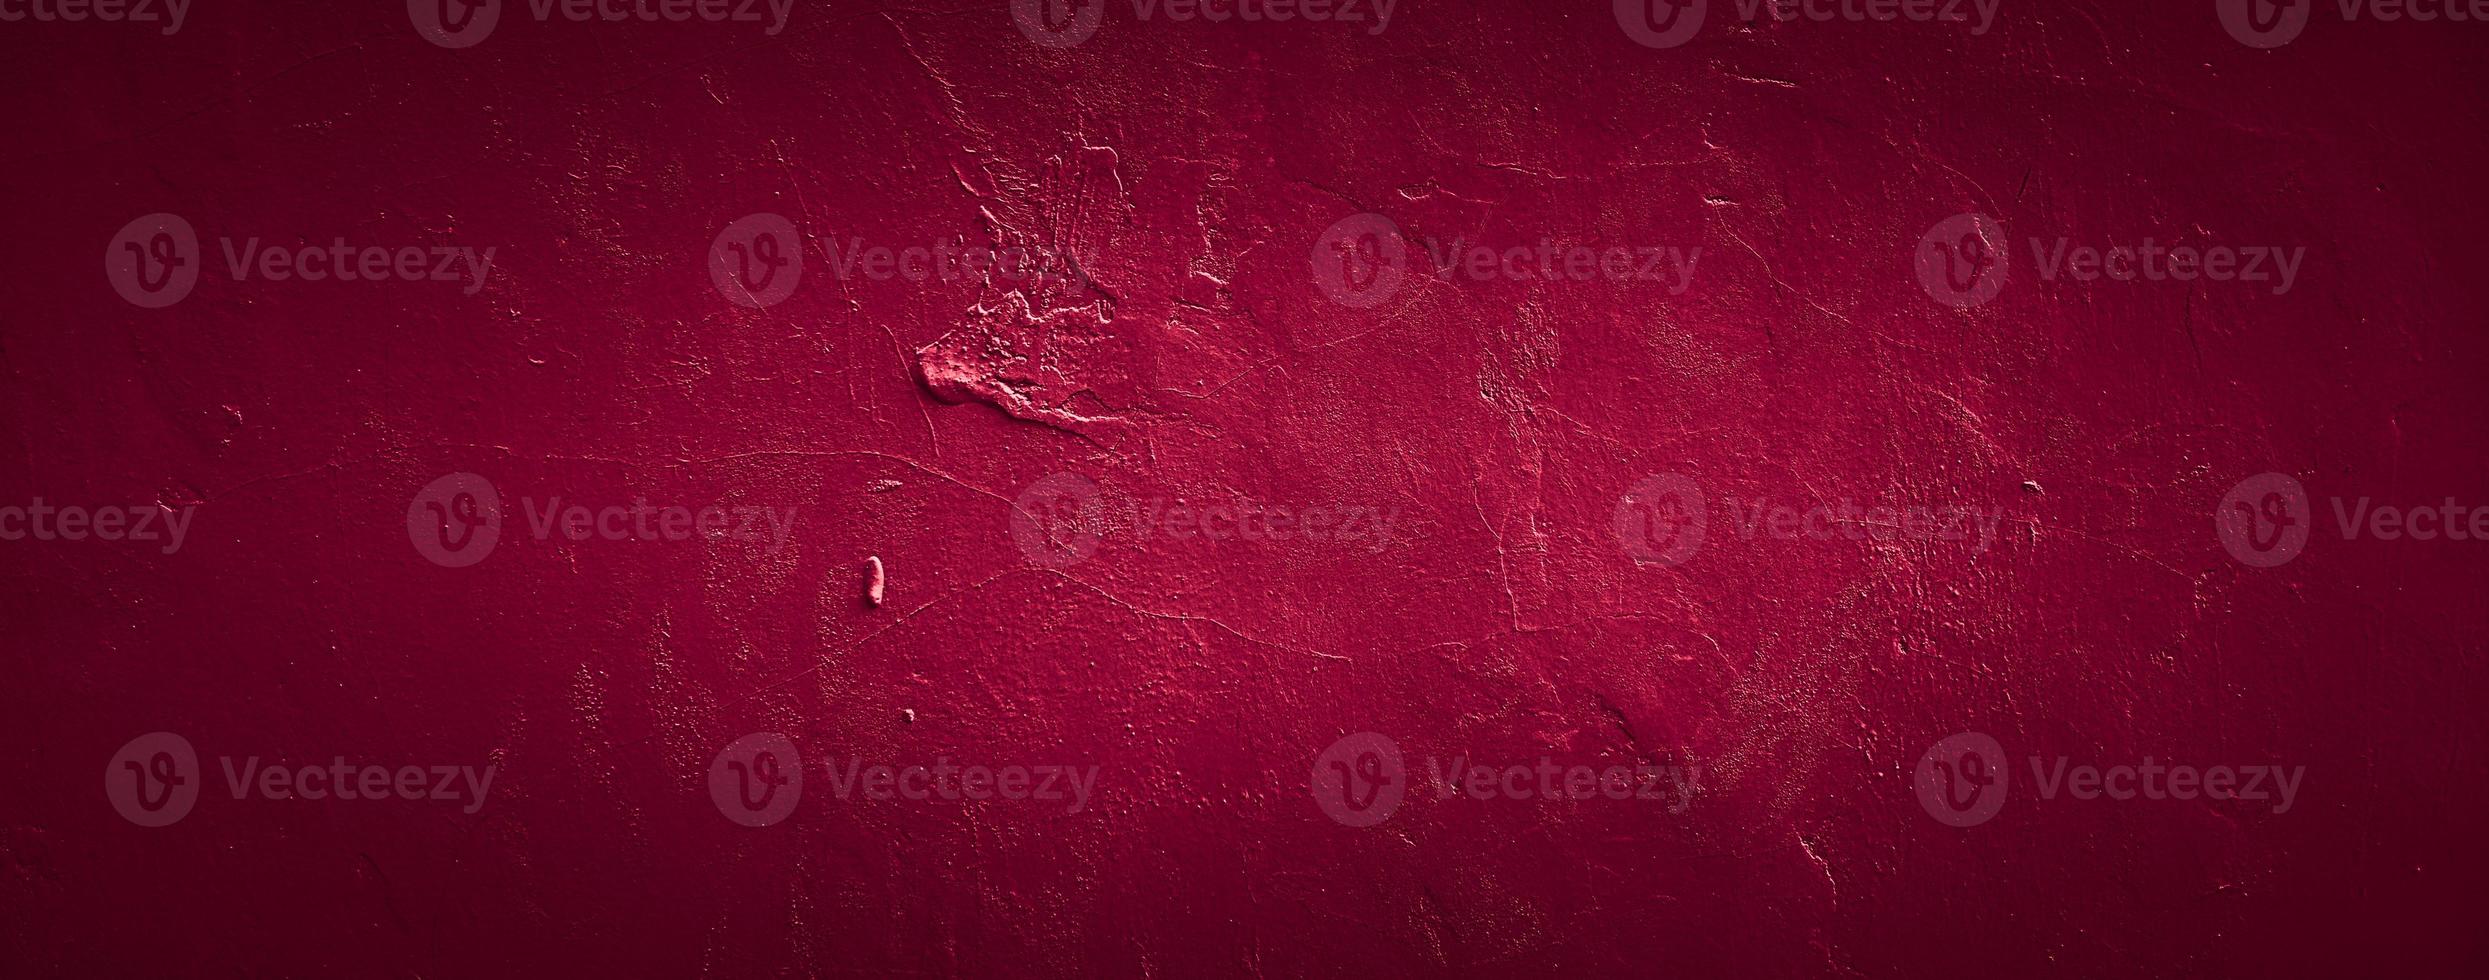 dark grungy red abstract concrete wall texture background photo